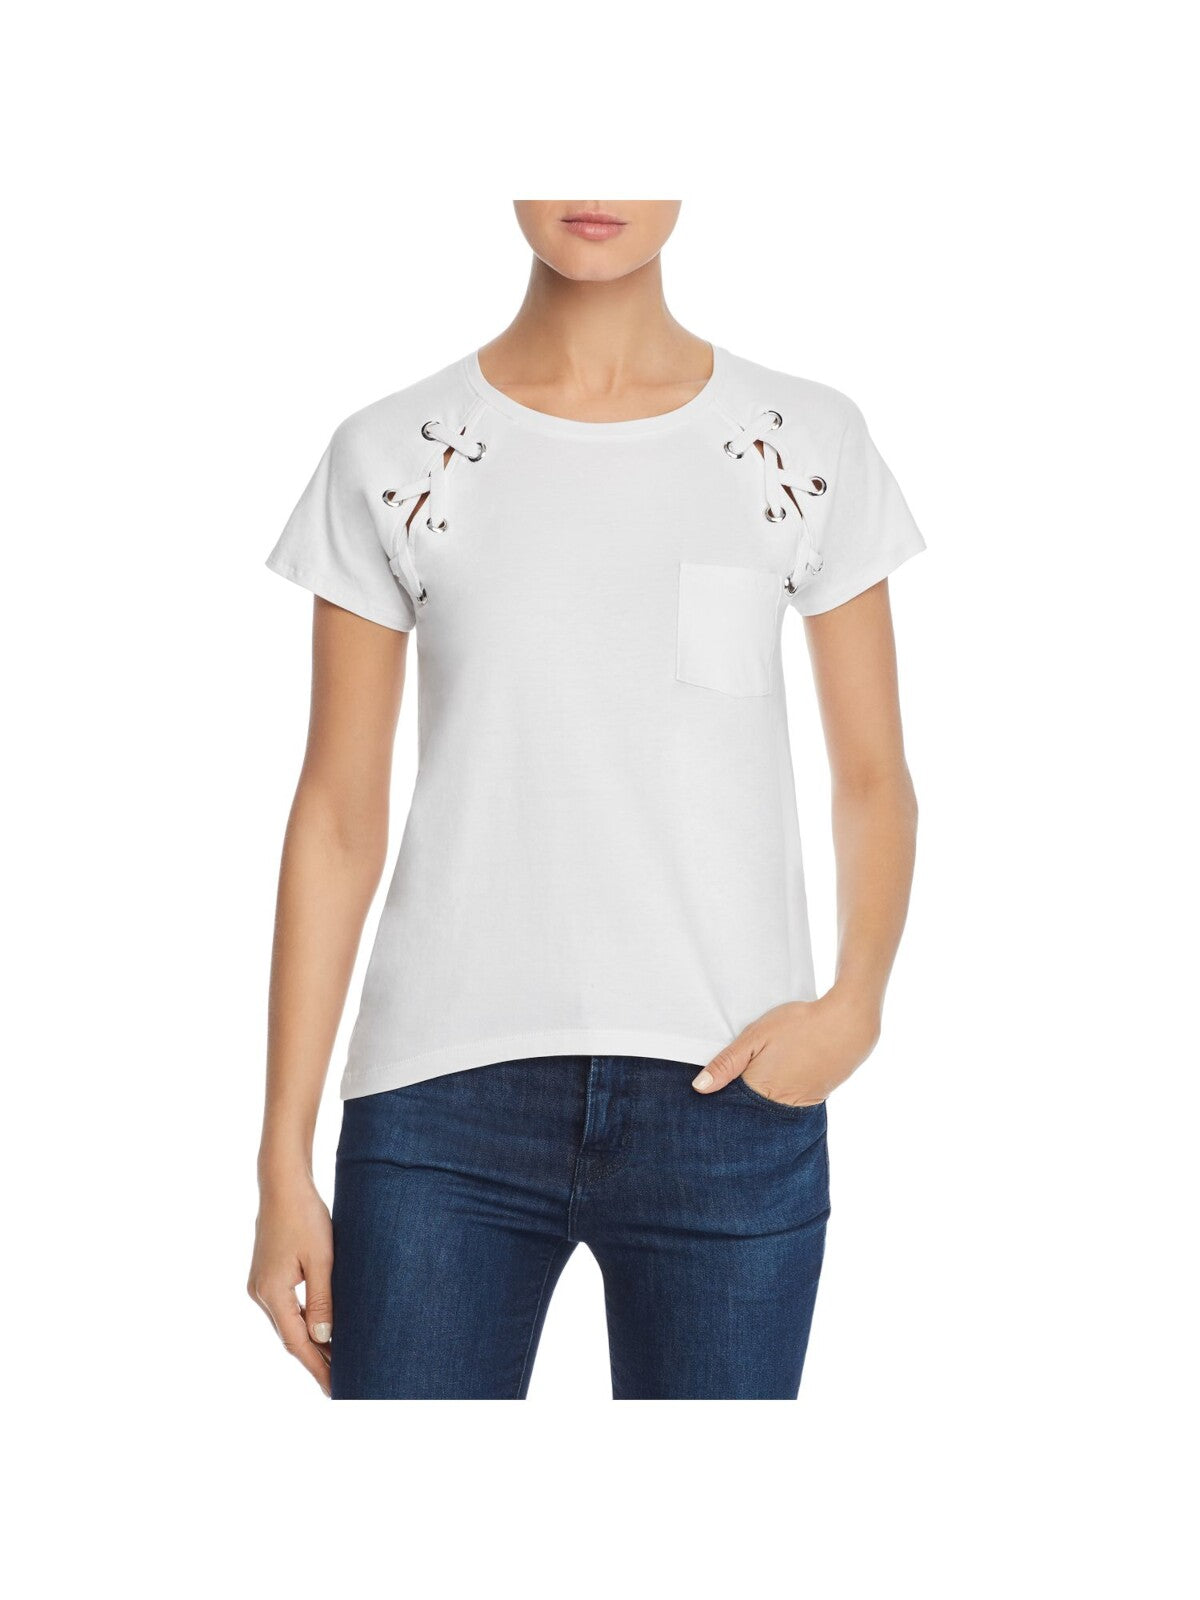 DESIGN HISTORY Womens White Pocketed Lace Up At Front Shoulders Short Sleeve Crew Neck T-Shirt M